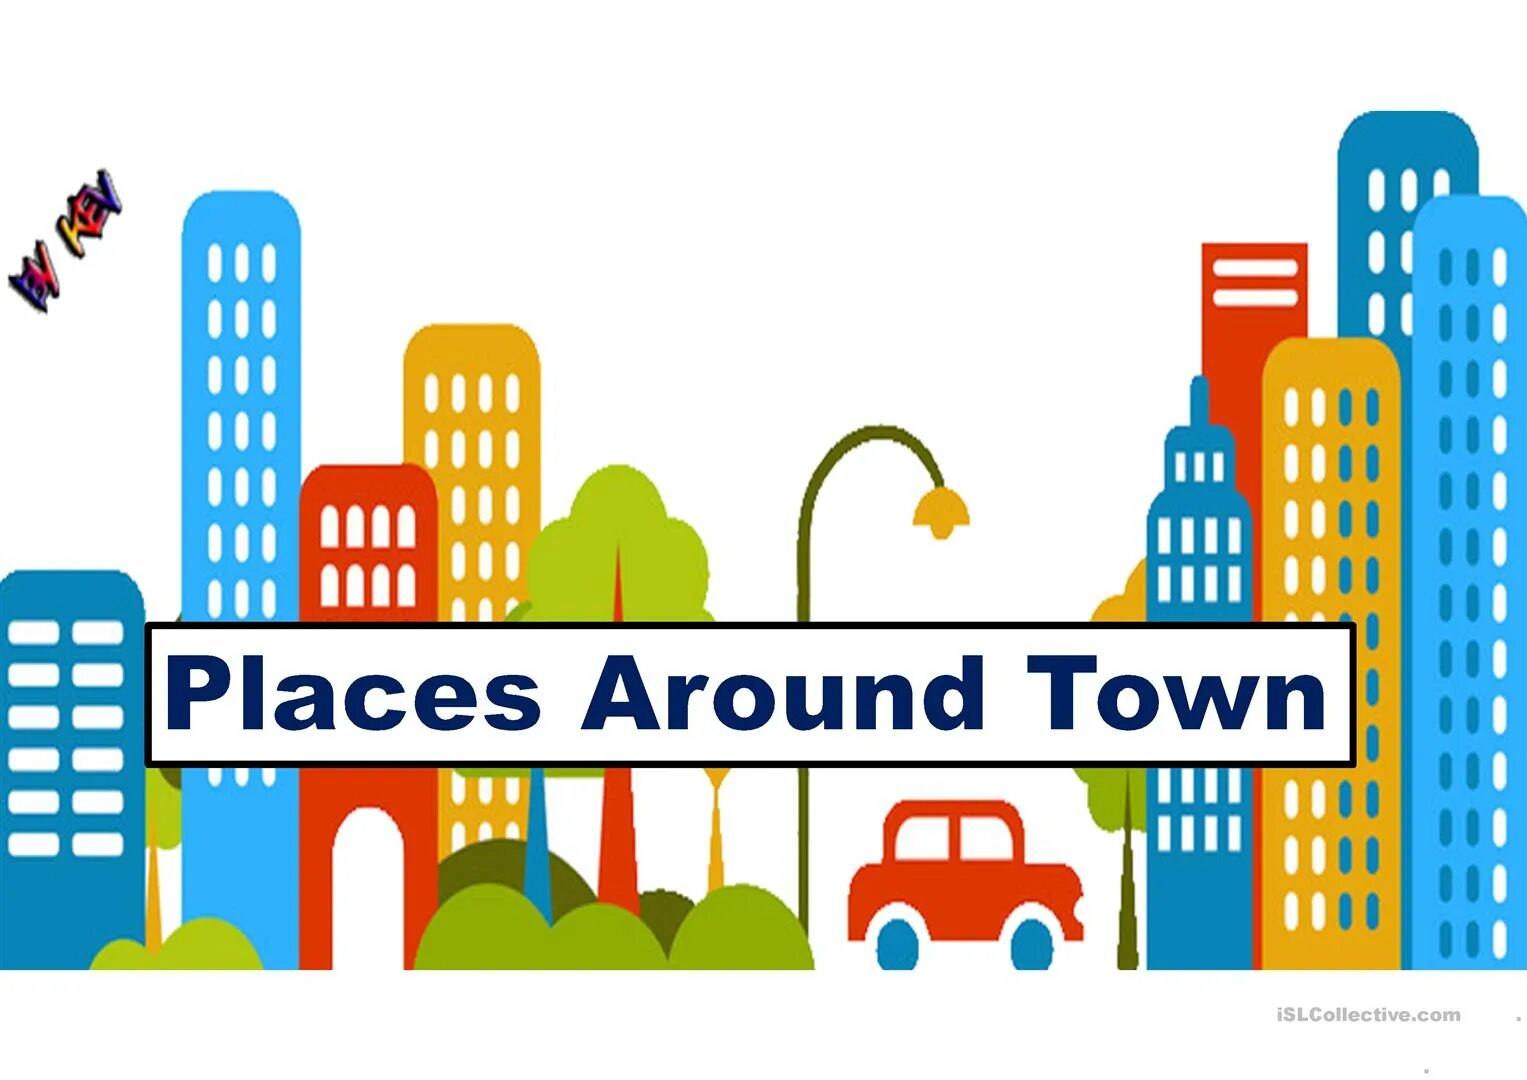 Getting around the city. Places around Town. Places in Town для детей. Around Town 5 класс. Places around City.